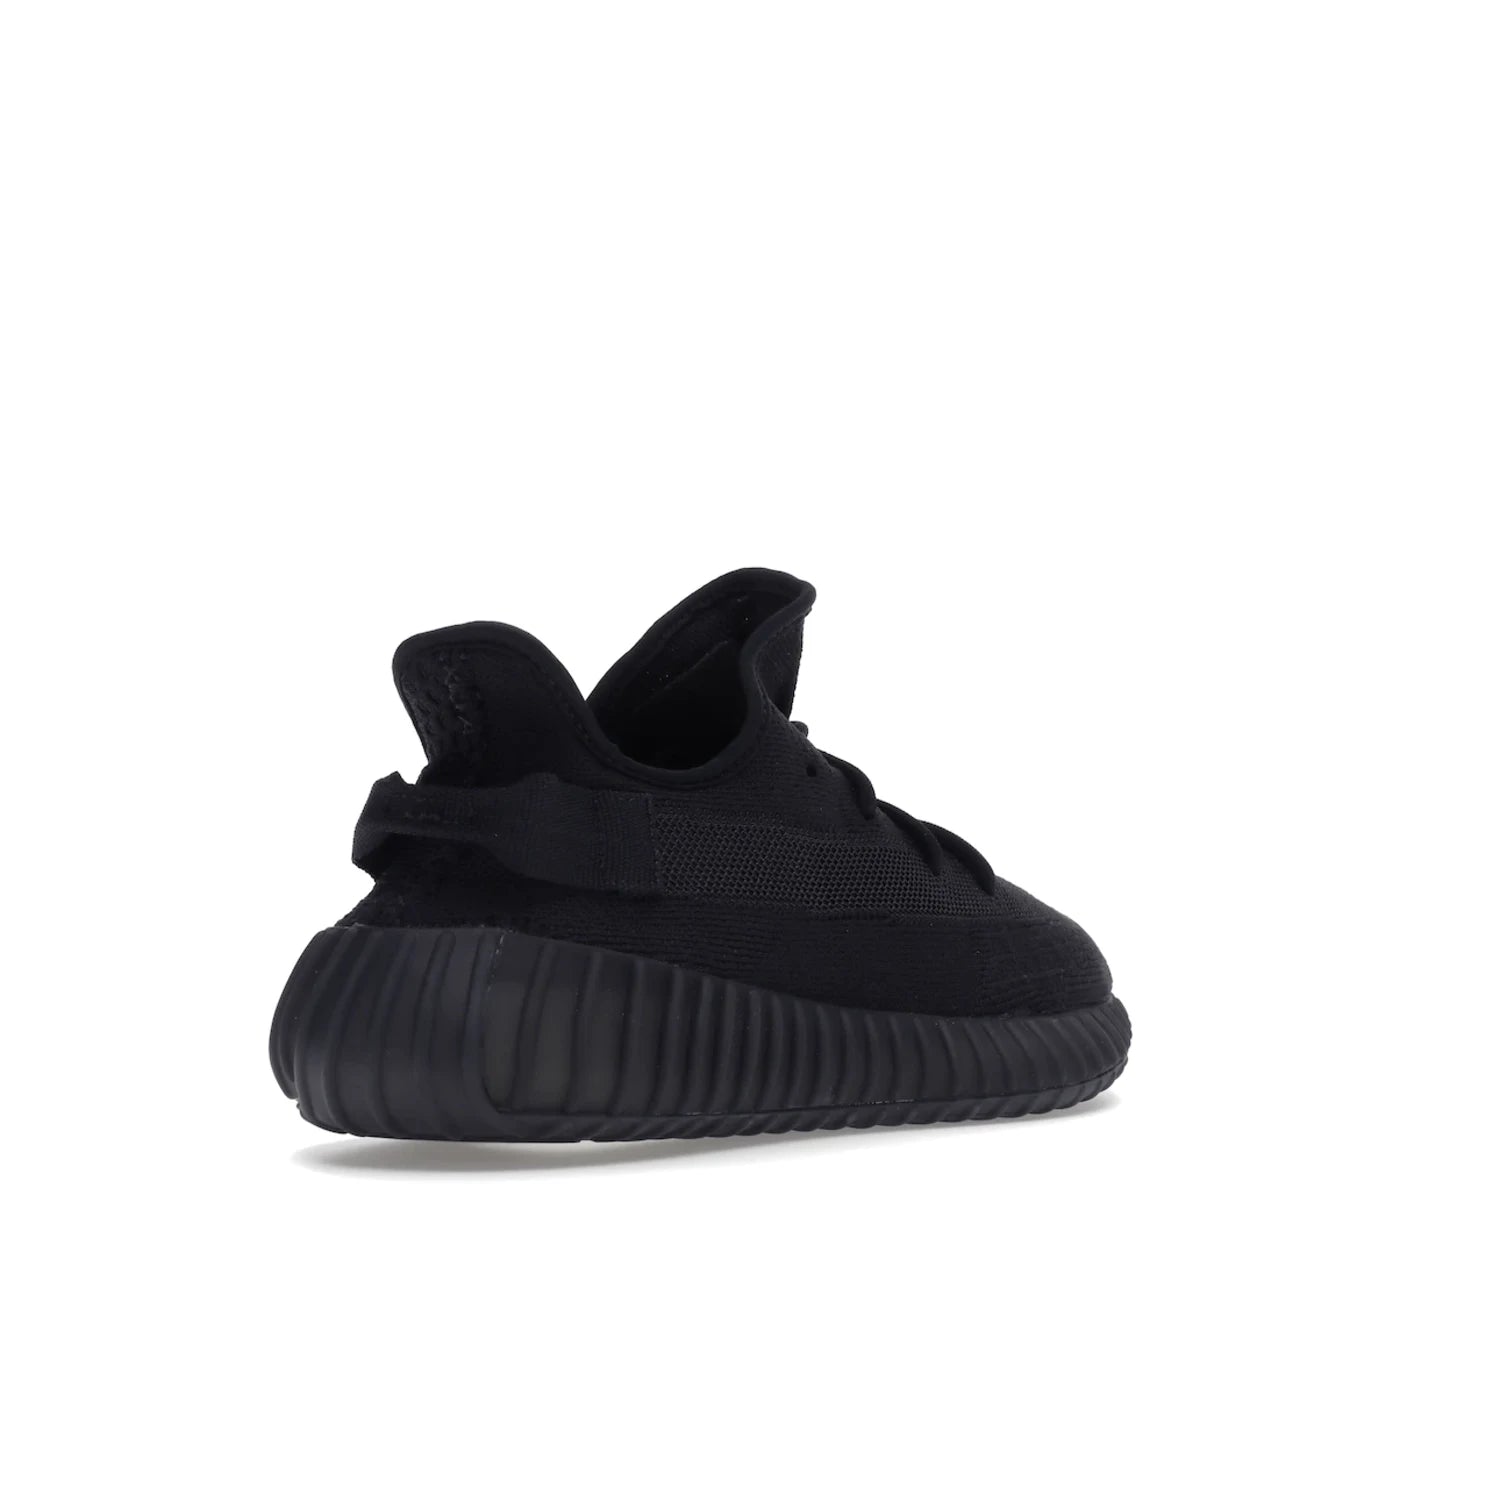 adidas Yeezy Boost 350 V2 Onyx - Image 32 - Only at www.BallersClubKickz.com - Adidas Yeezy Boost 350 V2 Onyx Triple Black shoes for comfort and style. Arriving Spring 2022.